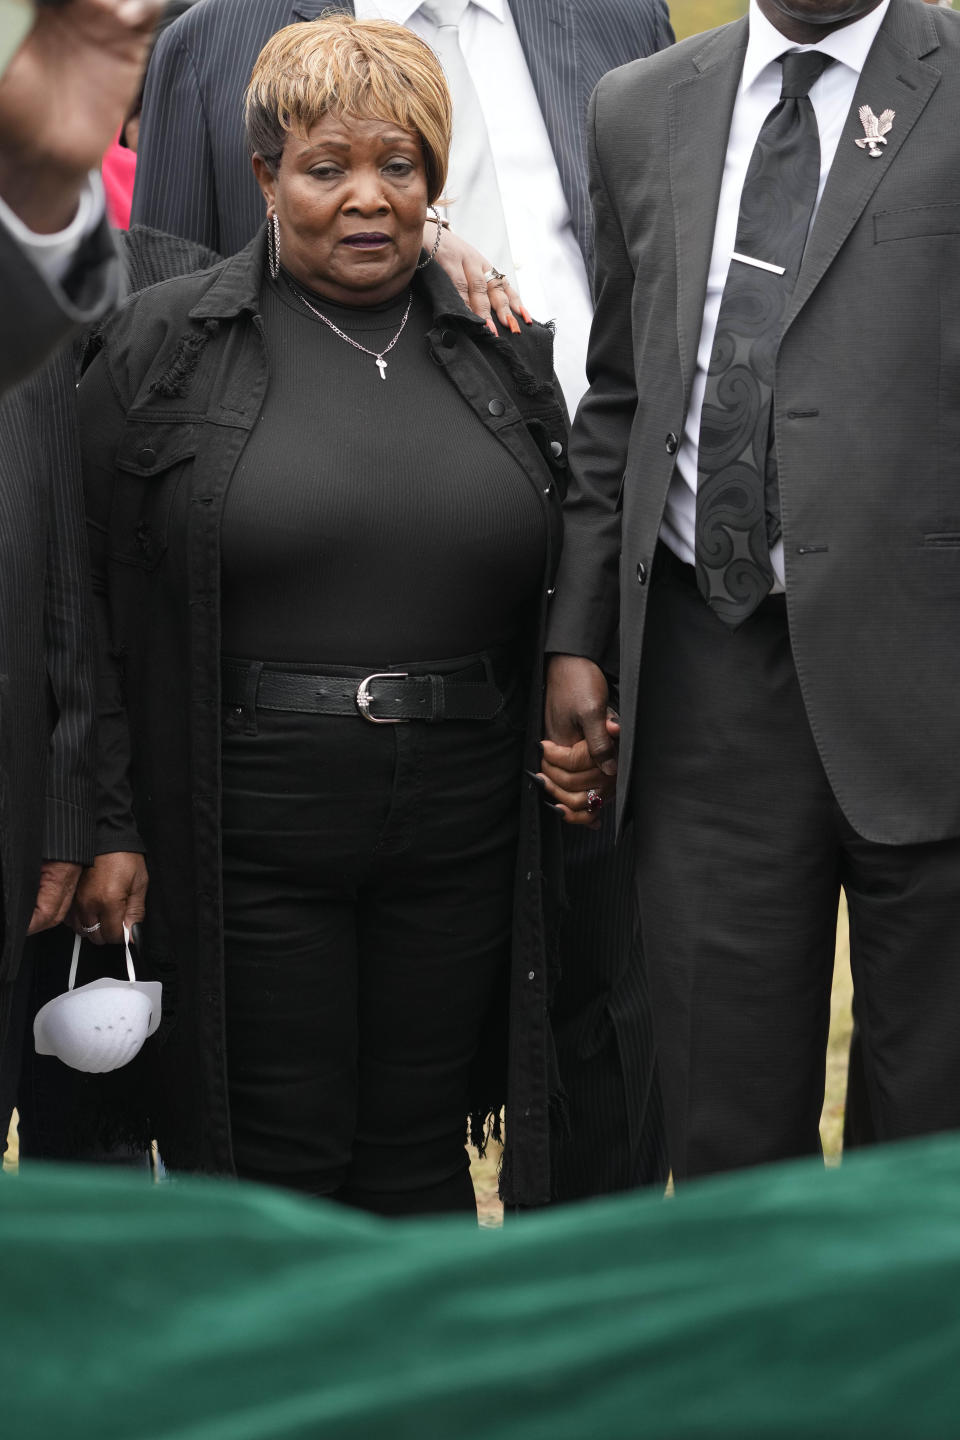 Bettersten Wade, mother of Dexter Wade, a 37-year-old man who died after being hit by a Jackson, Miss., police SUV driven by an off-duty officer, watches her son's body transferred to a mortuary transport, after being exhumed from a pauper's cemetery near the Hinds County Penal Farm in Raymond, Monday, Nov. 13, 2023. Civil rights attorney Ben Crump said Monday he is asking the U.S. Justice Department to investigate why authorities waited several months to notify the family of his death. (AP Photo/Rogelio V. Solis)